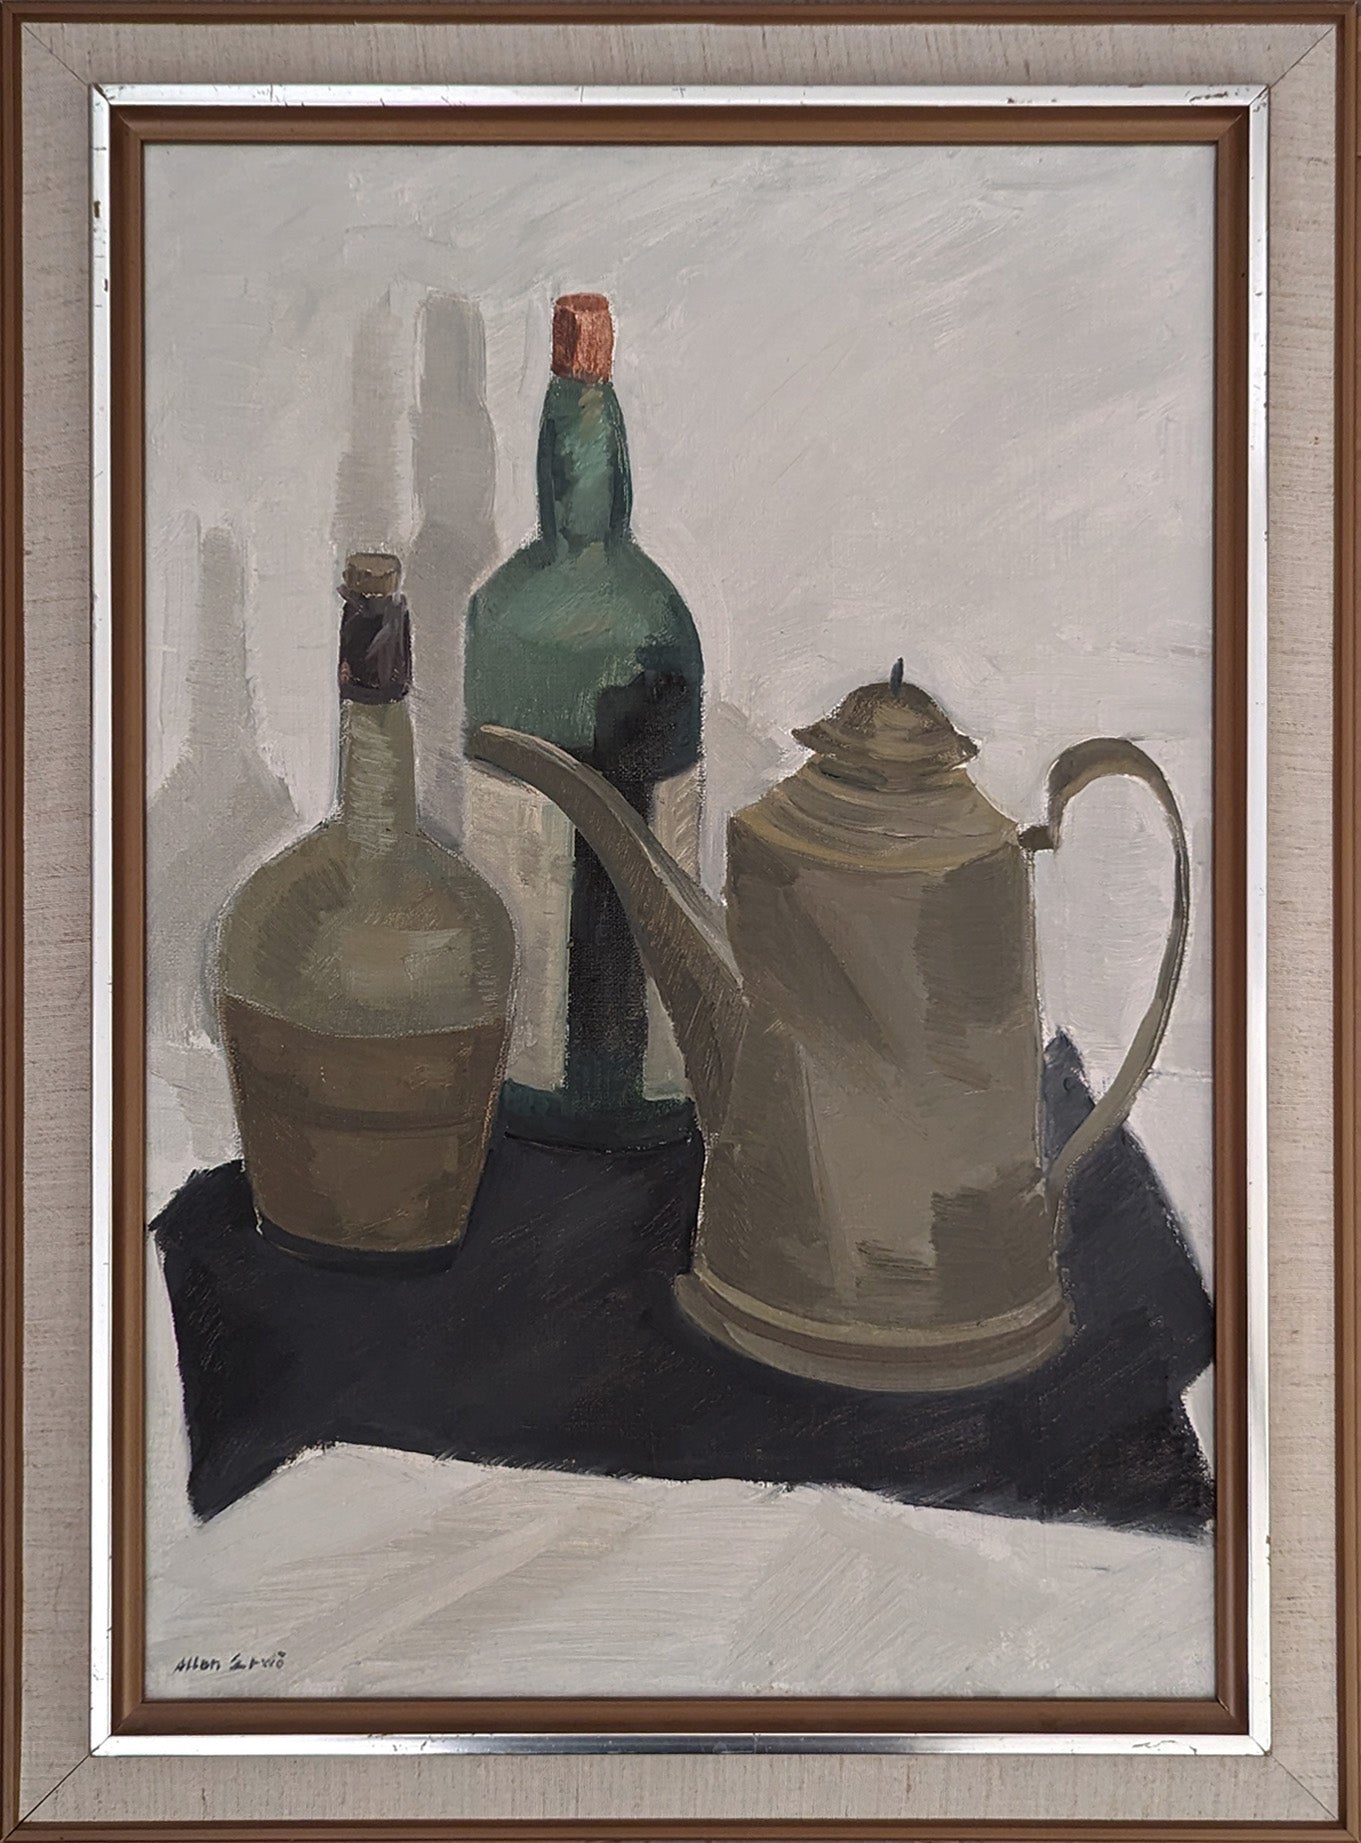 Still life with Coffee Pot & Wine Bottle